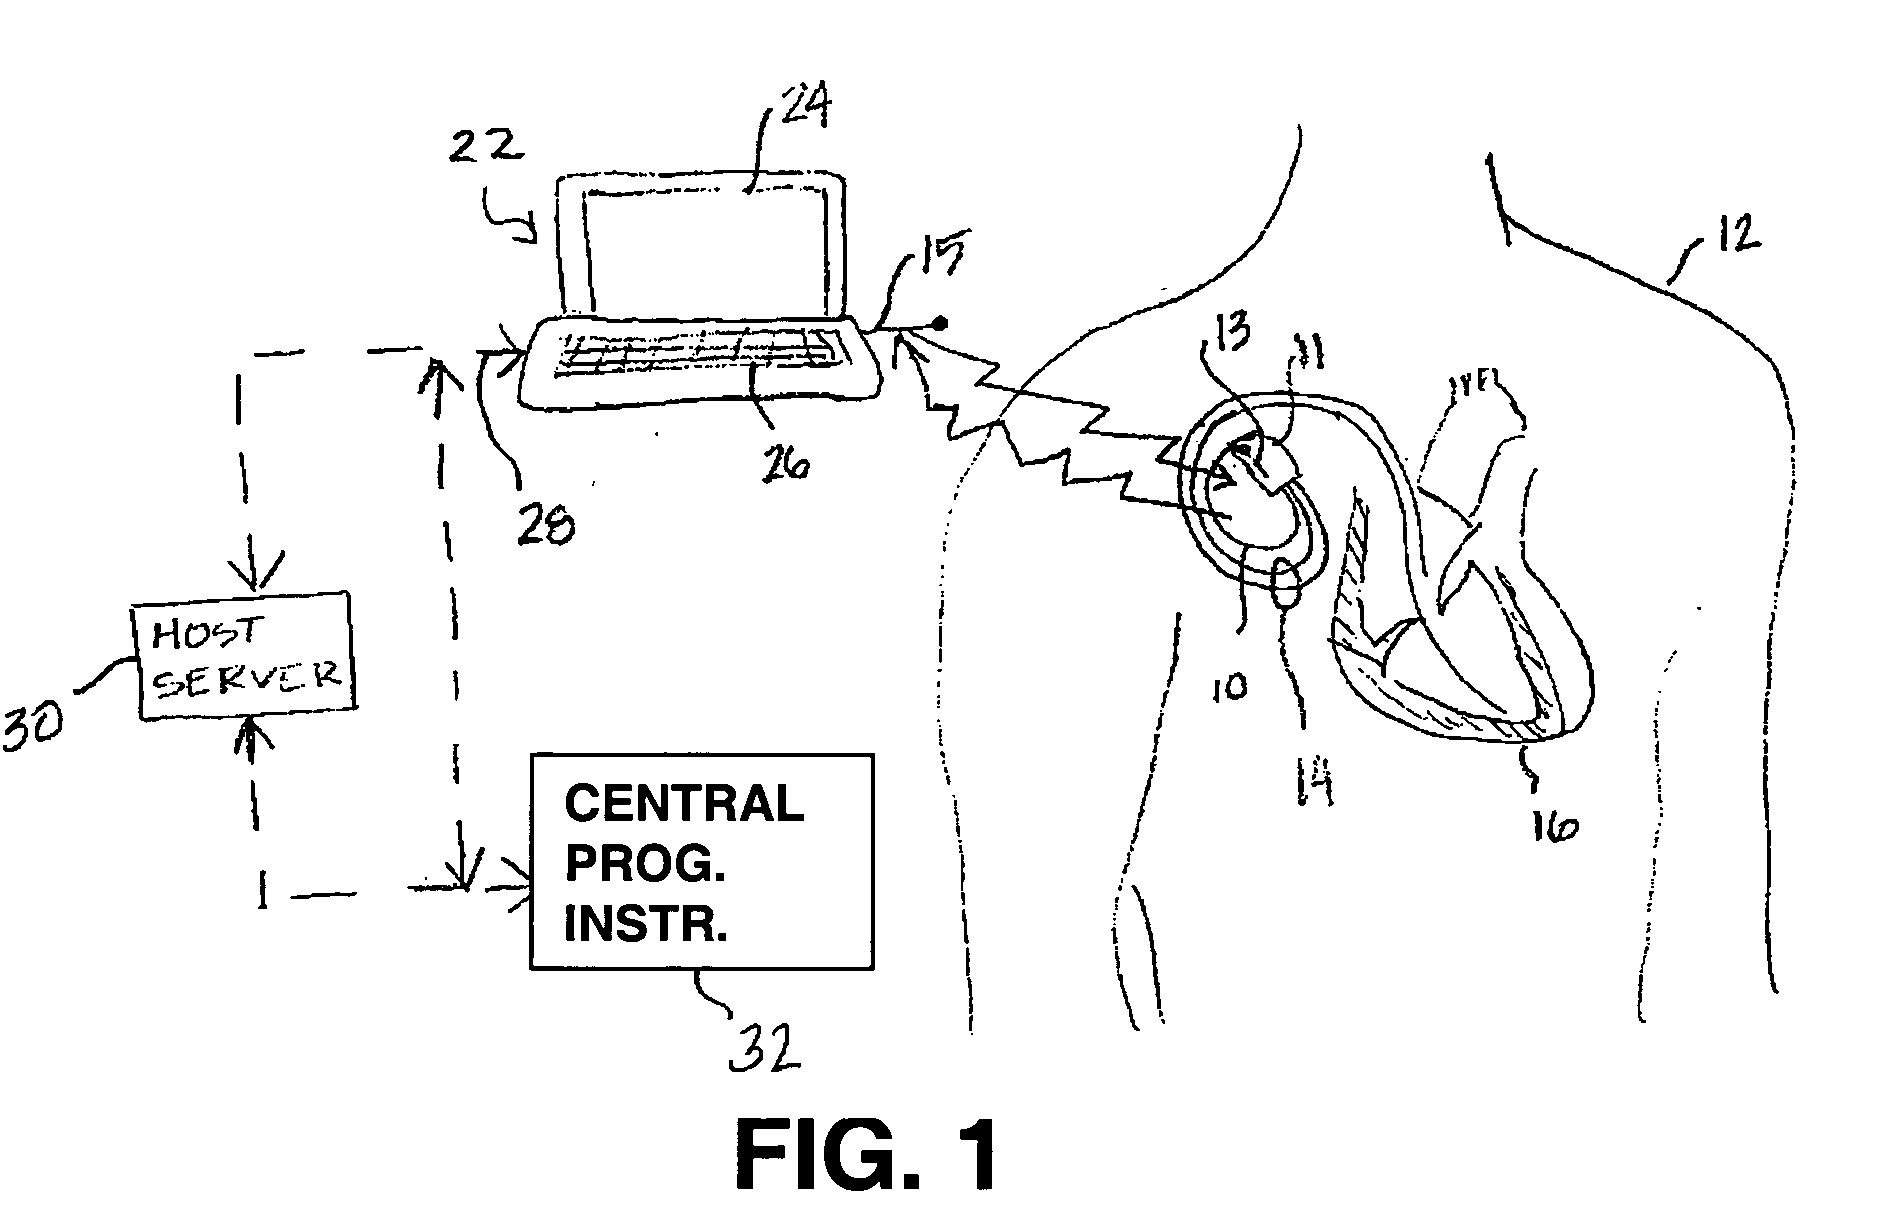 Conditional requirements for remote medical device programming